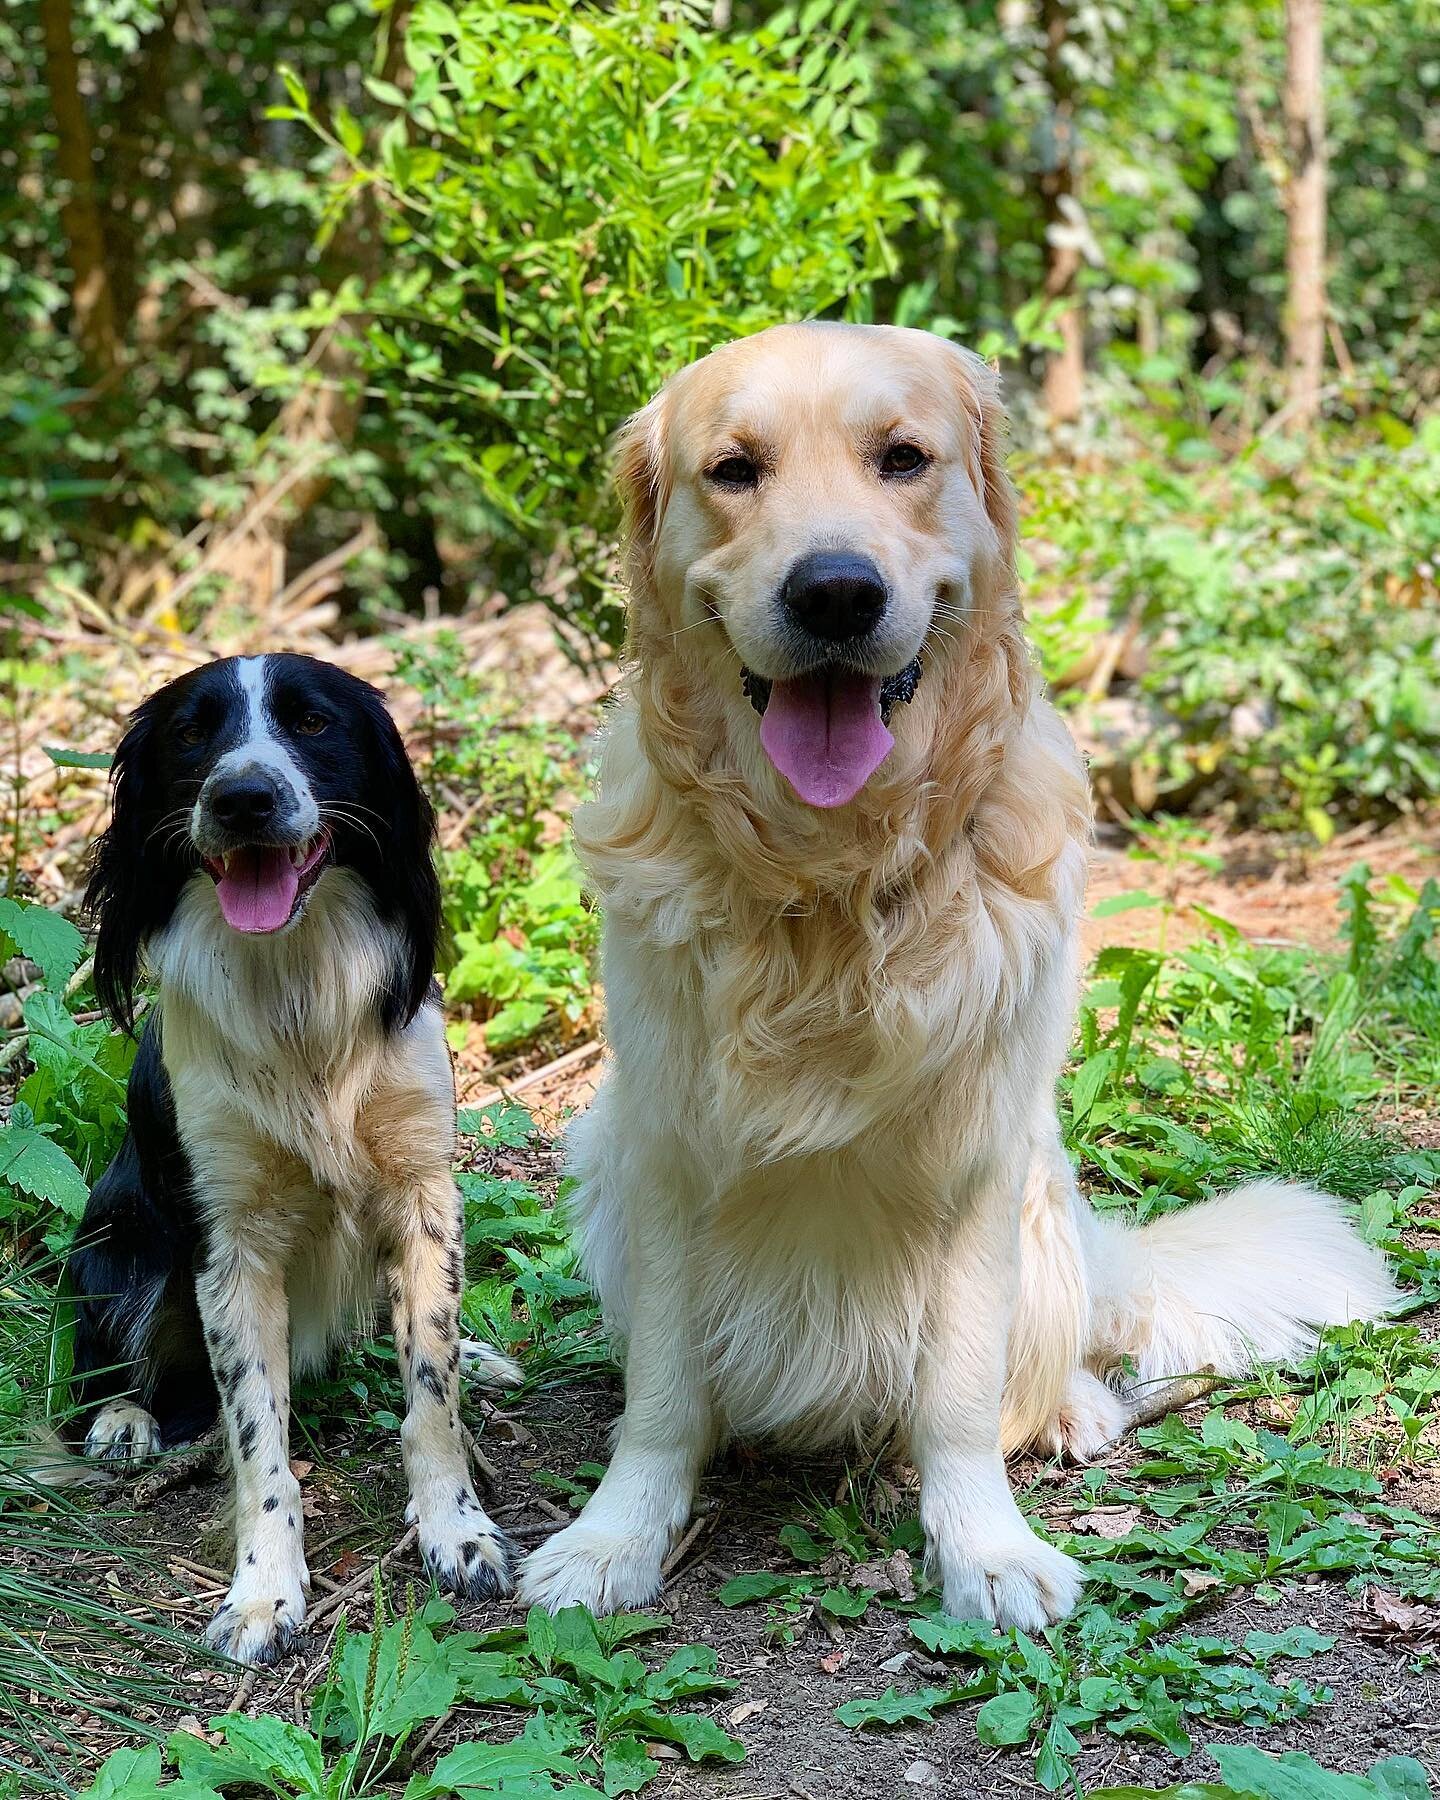 Lols a minute with these 2 😛😛
-
#doubletrouble #puppers #goobers #happy #doggos #puppylife #dogwalk #friends #pawls #dogsofinstagram #goldenretriever #collie #doglovers #dogwalker #dogphotography #oxford #oxforddogs #dog #oxford #oxfordbusiness #ox